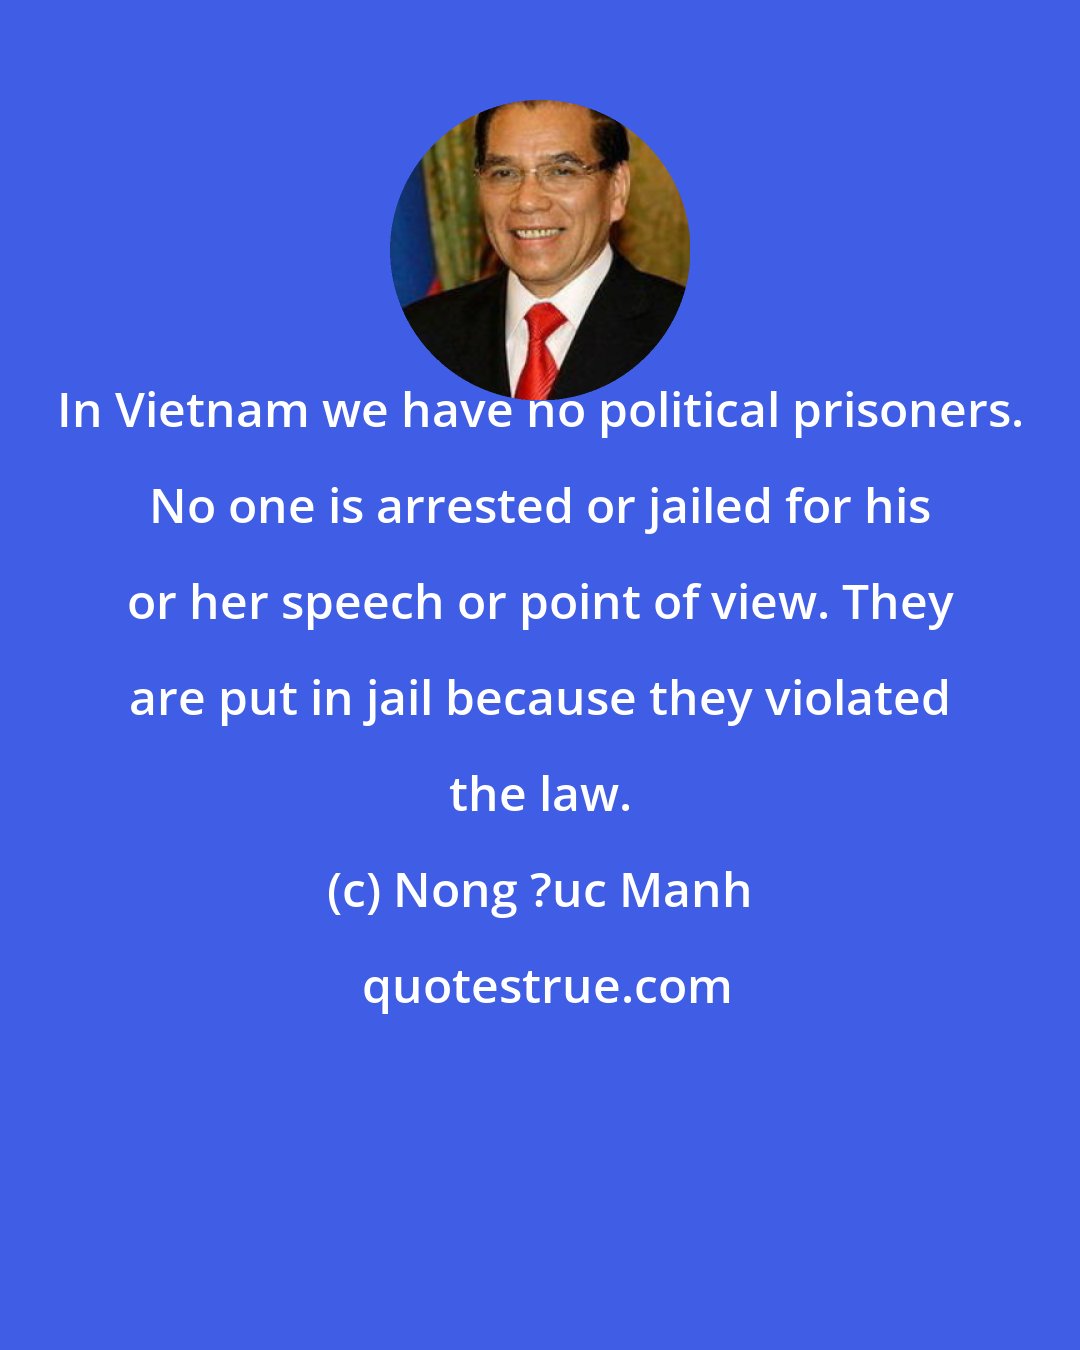 Nong ?uc Manh: In Vietnam we have no political prisoners. No one is arrested or jailed for his or her speech or point of view. They are put in jail because they violated the law.